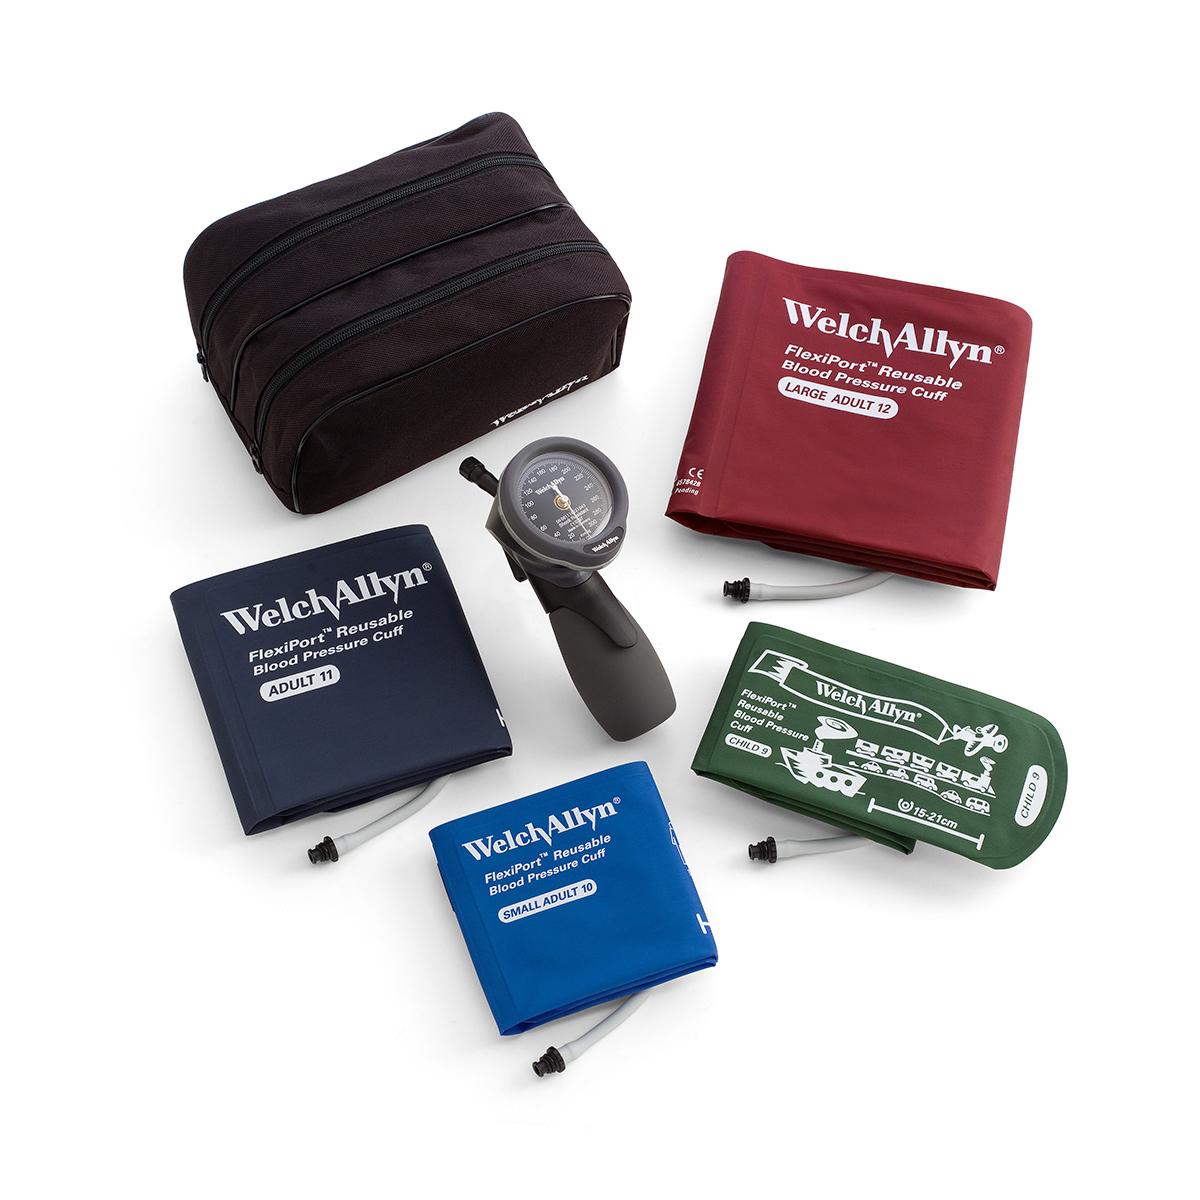 Gold Series DS66 Trigger Aneroids displayed with a variety of blood pressure cuffs and storage case.